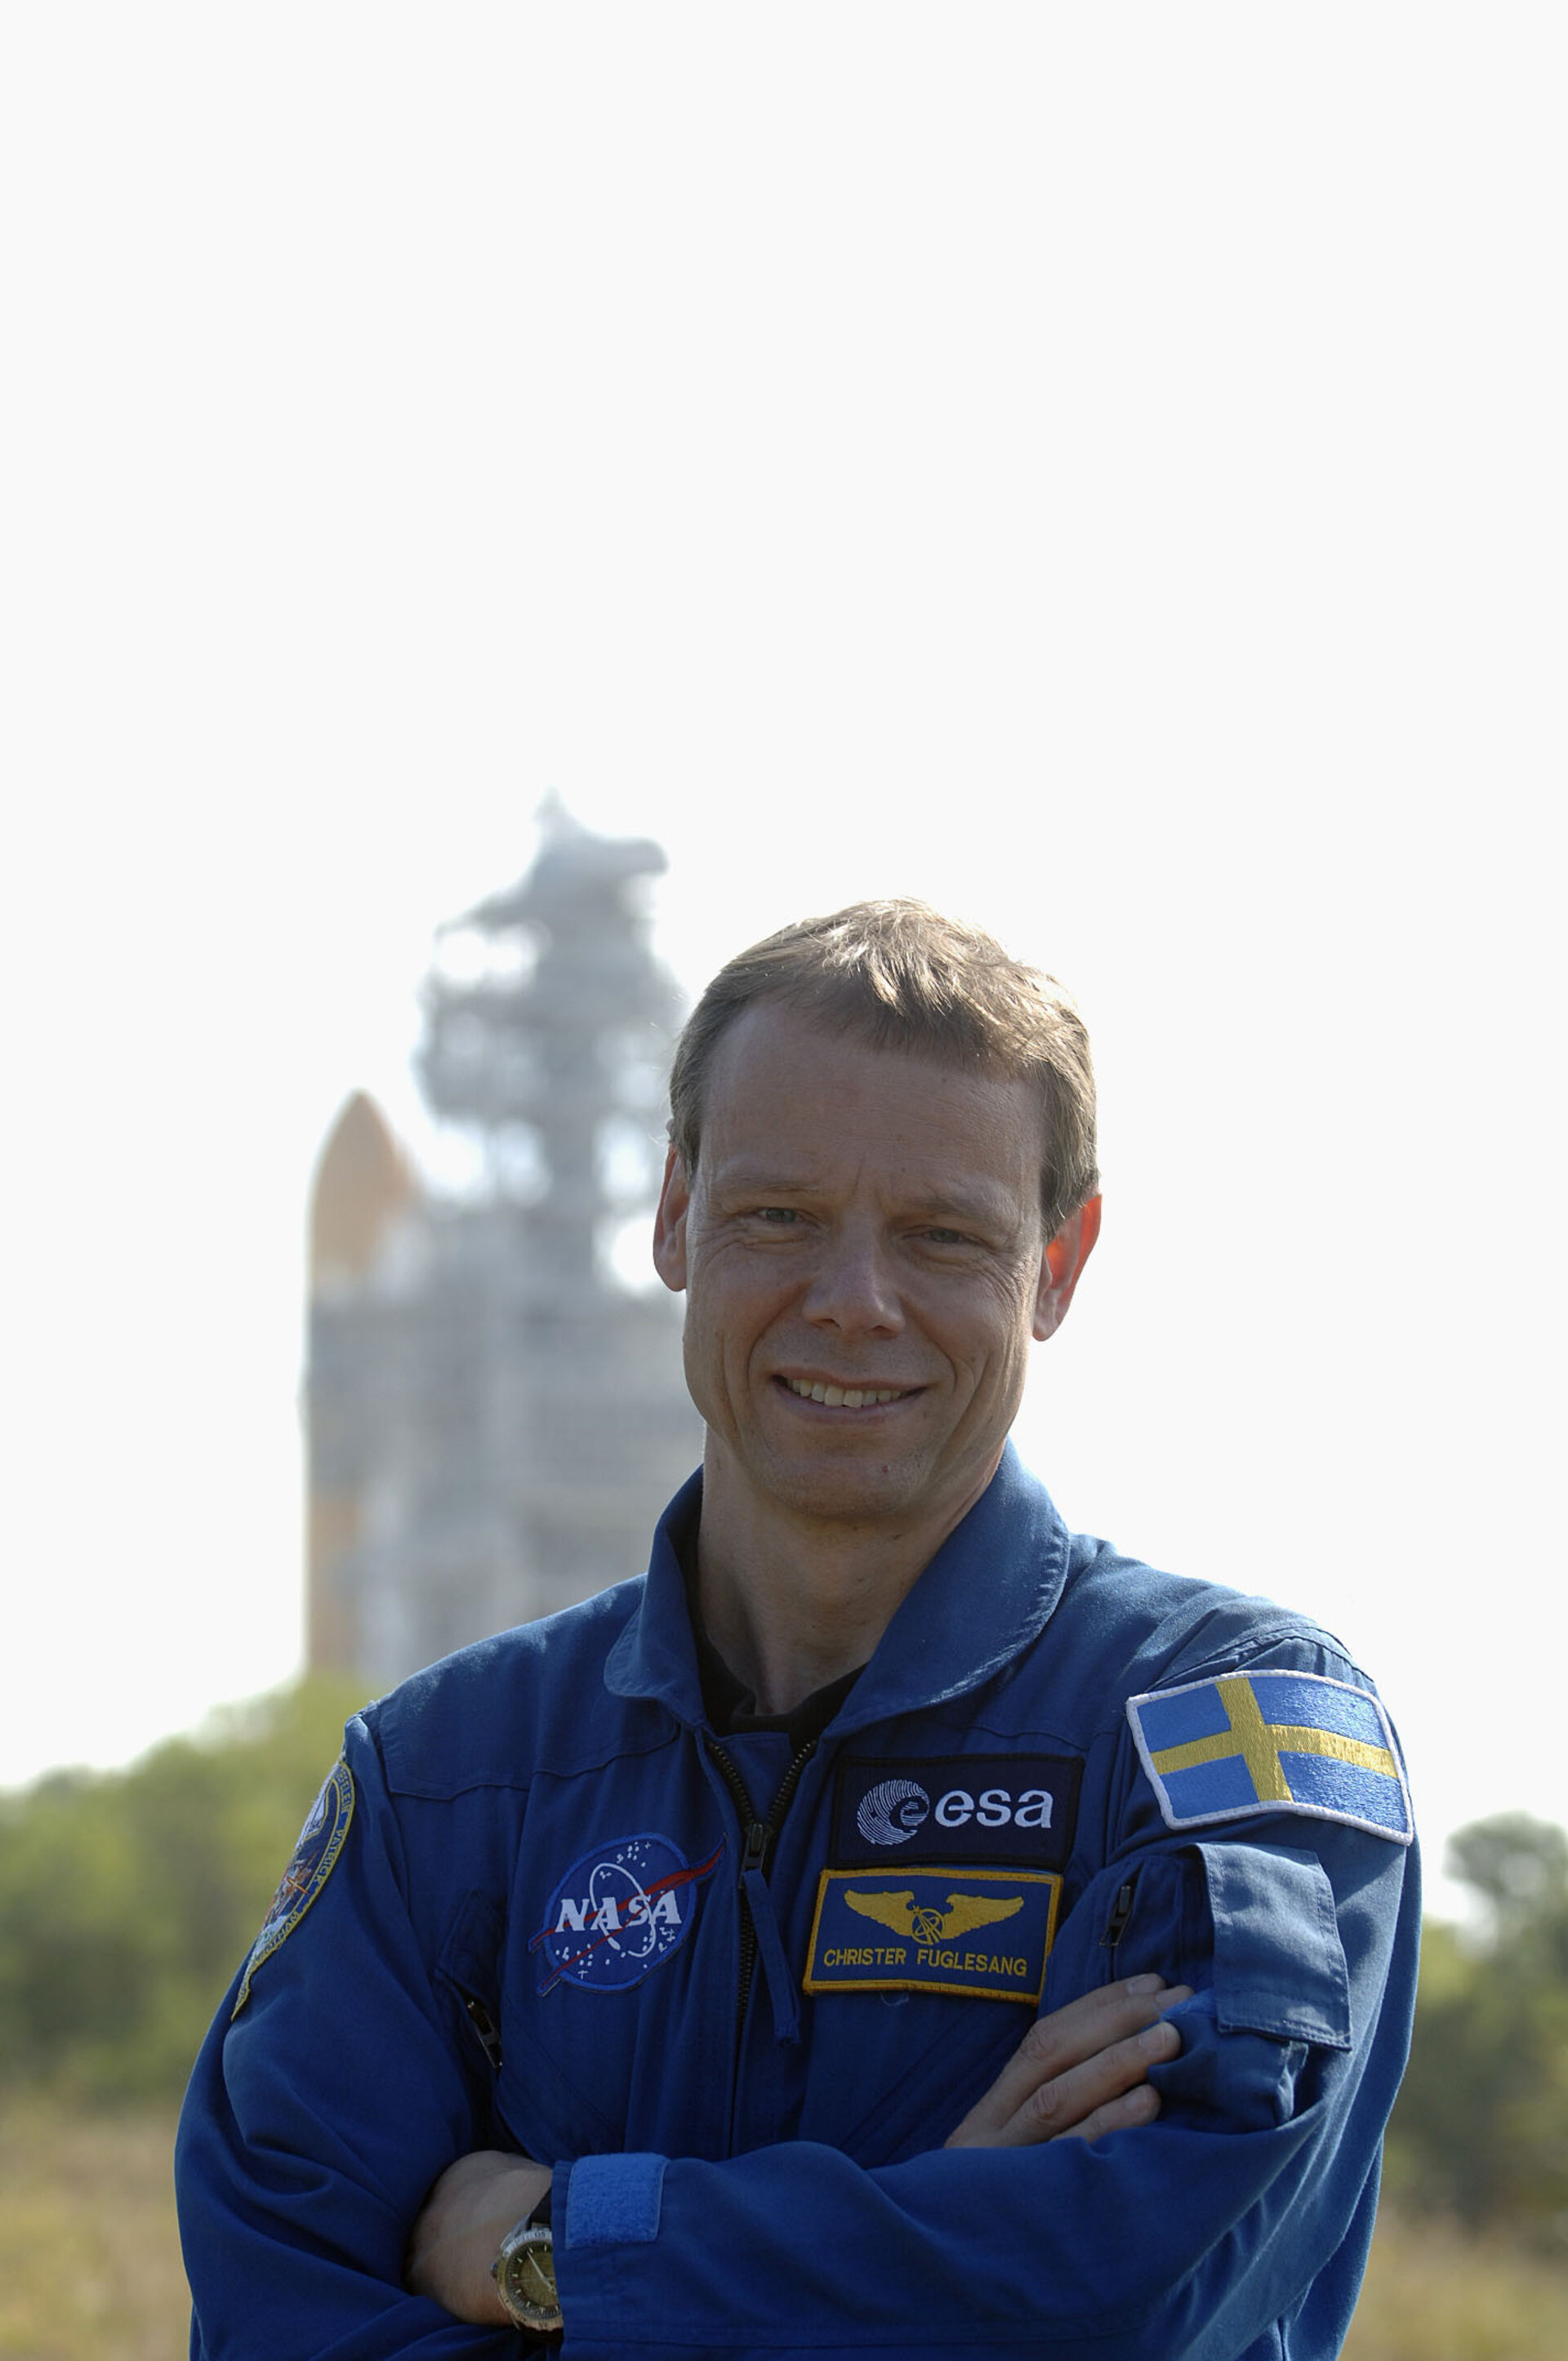 Christer Fuglesang was one of 20,000 applicants to ESA’s Astronaut Corps